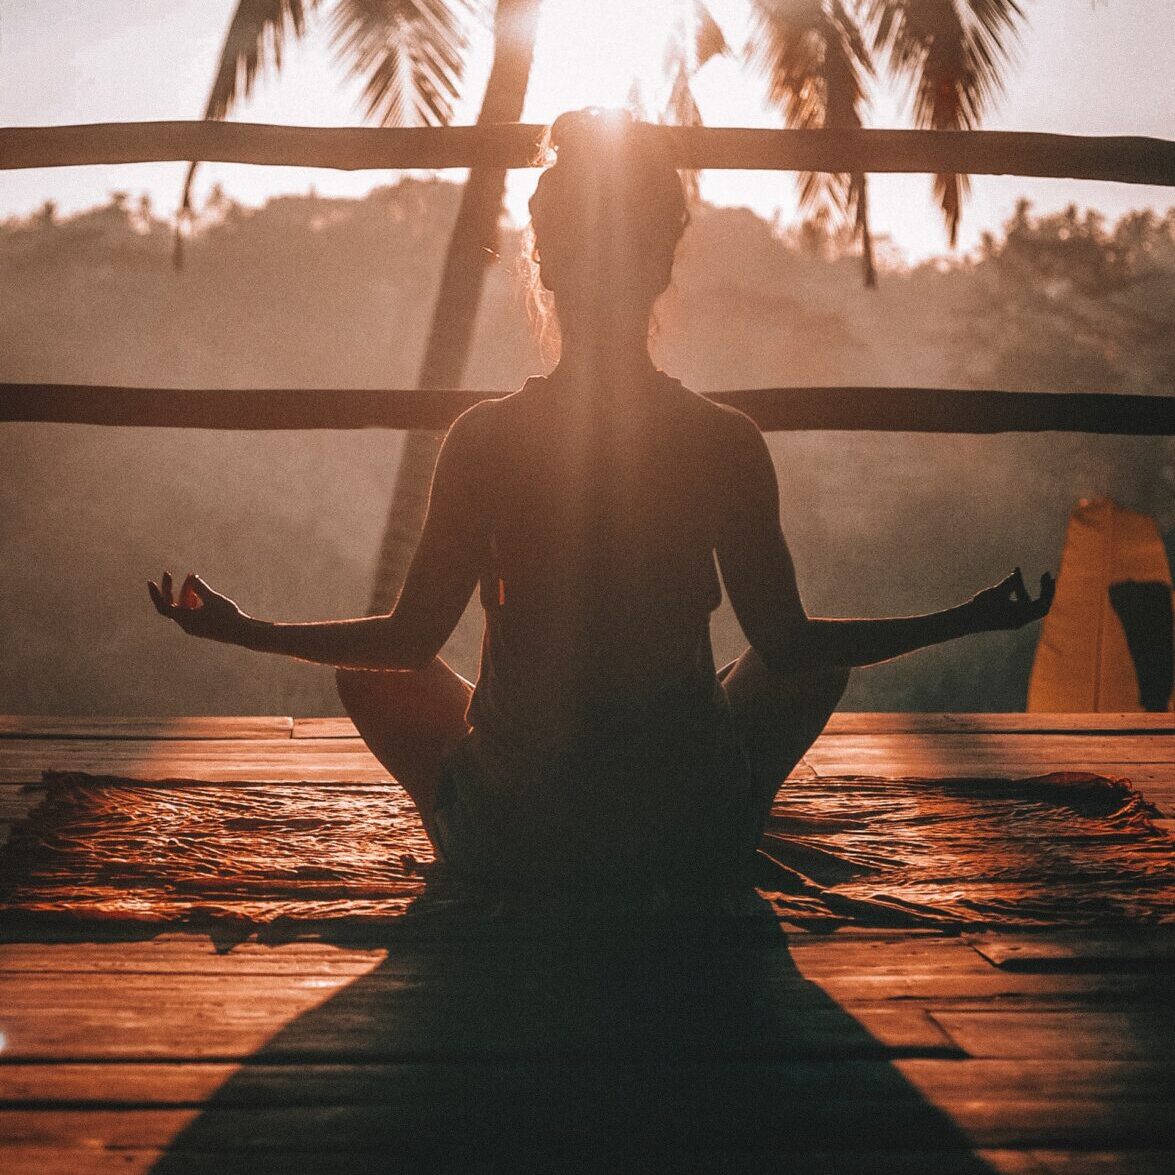 Silhouette of woman meditating outside in the sun